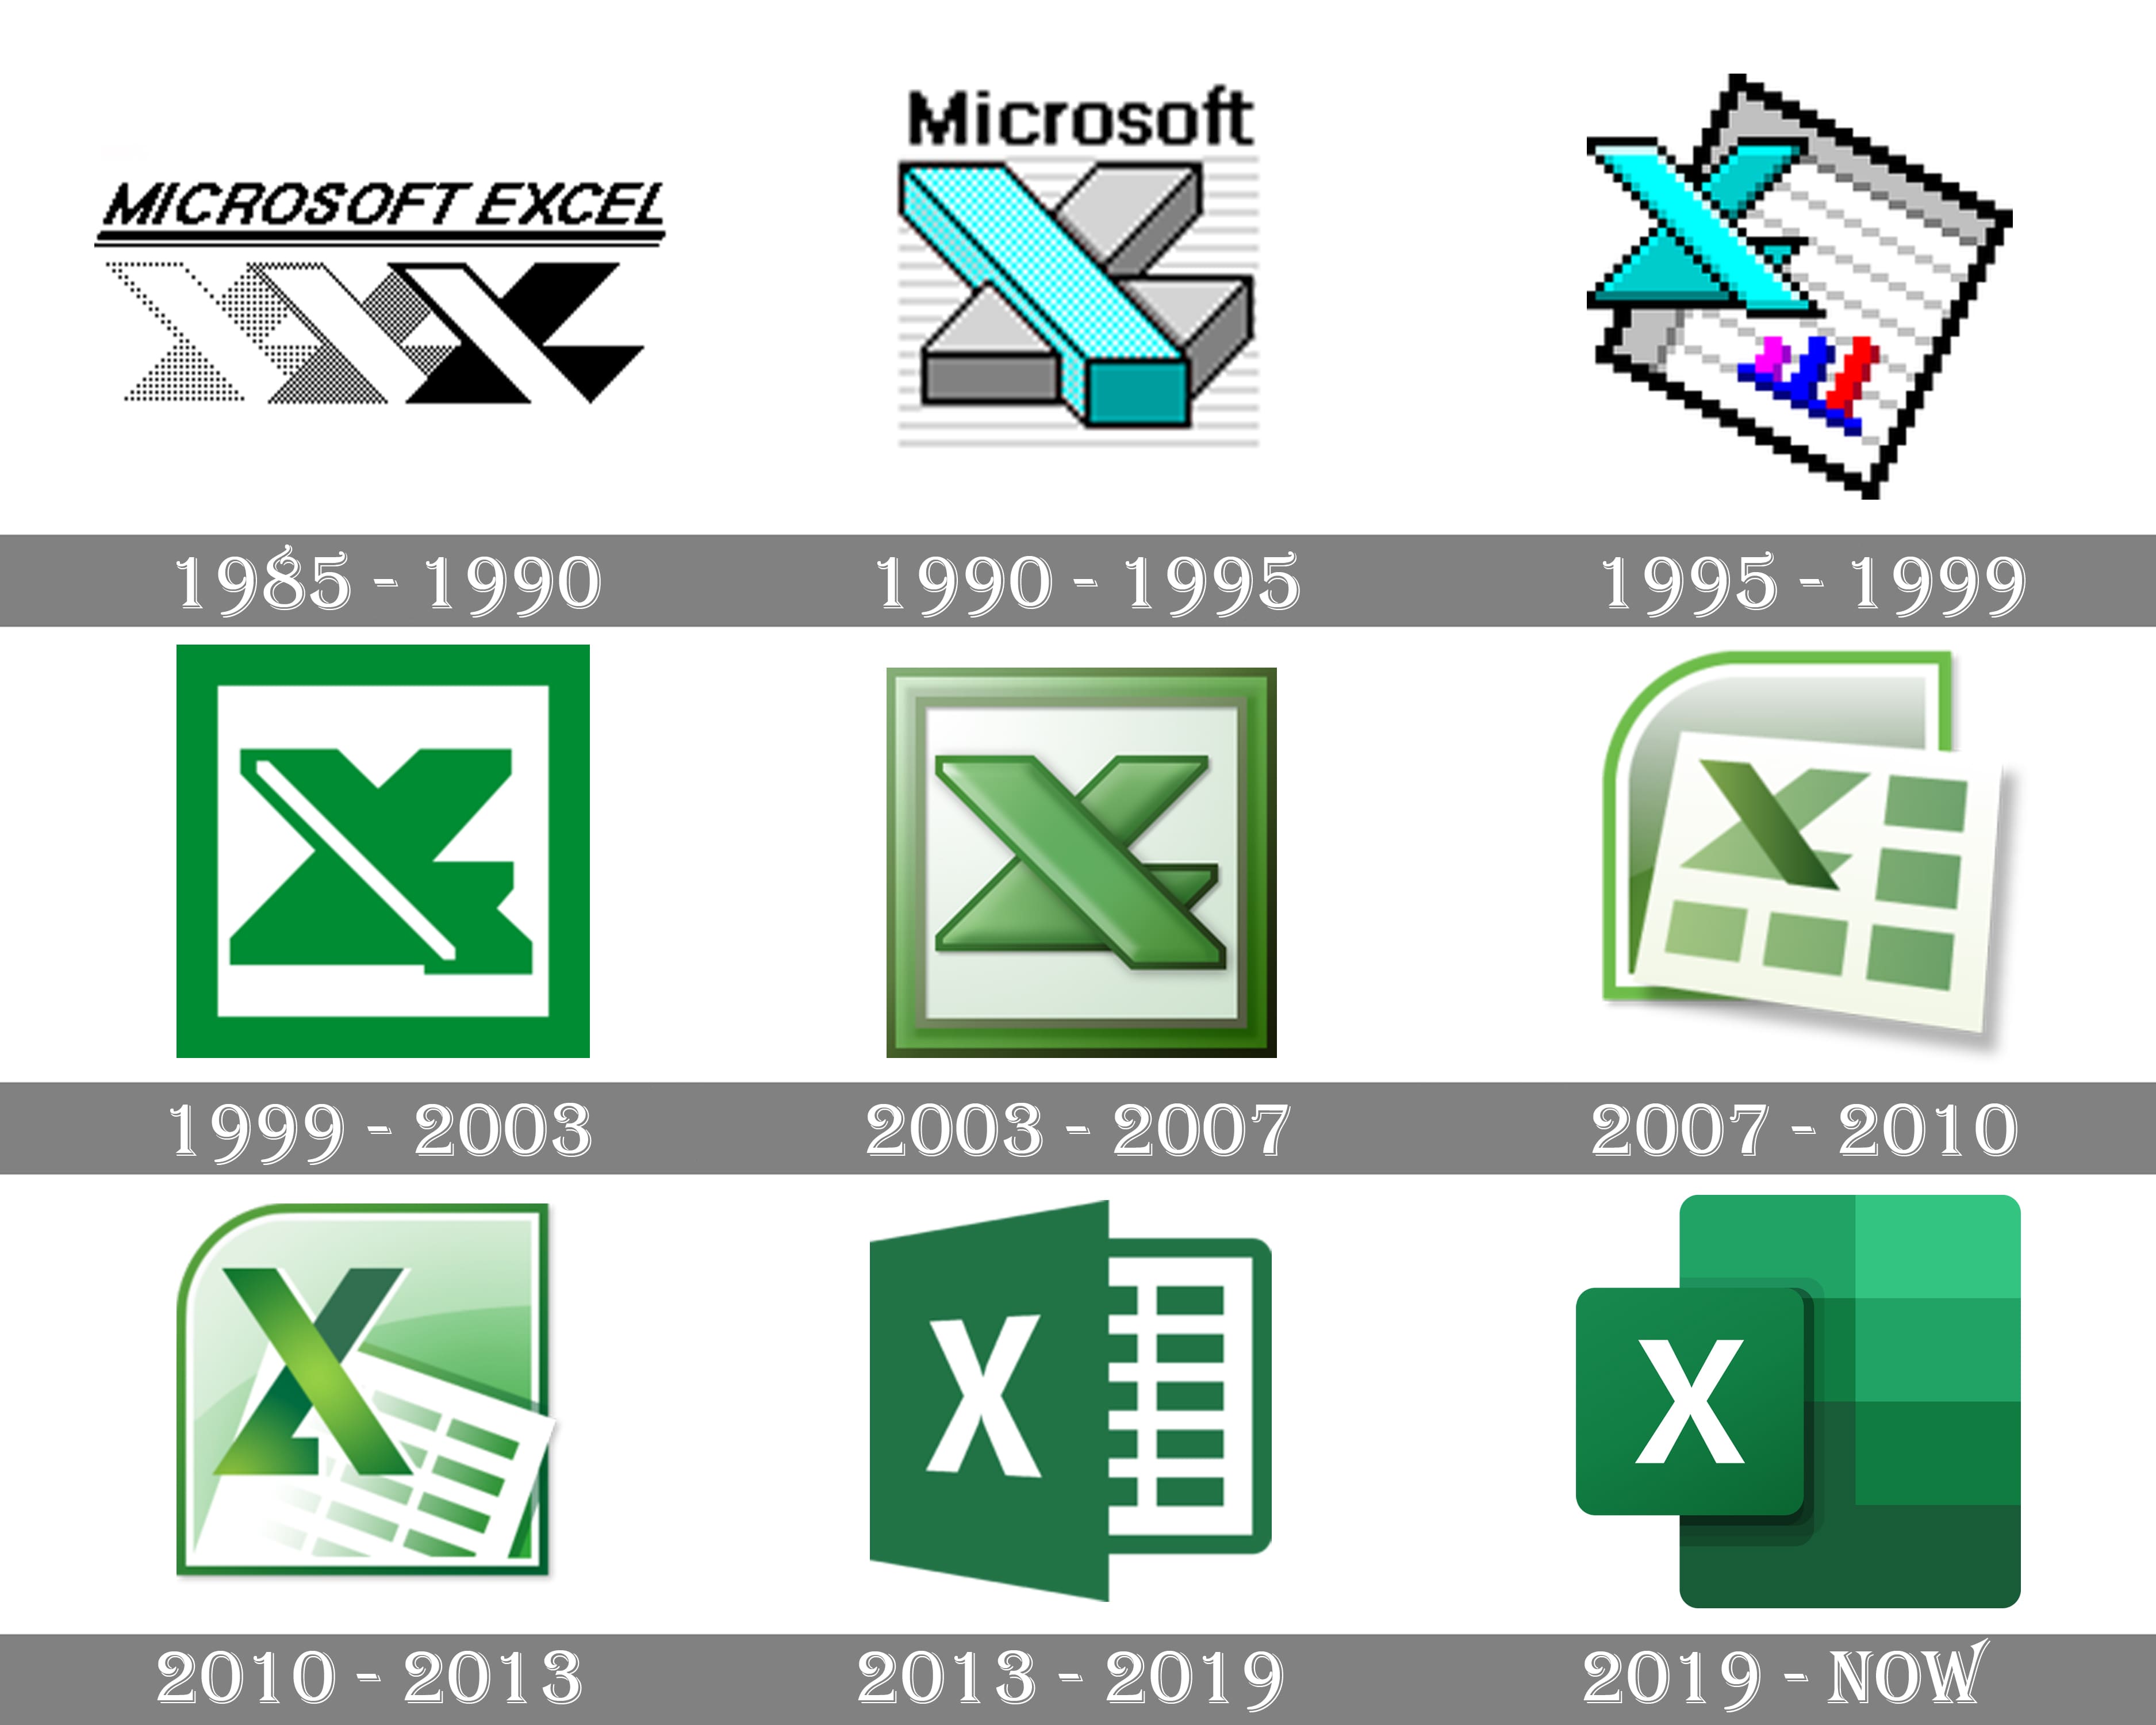 microsoft excel free download 2003